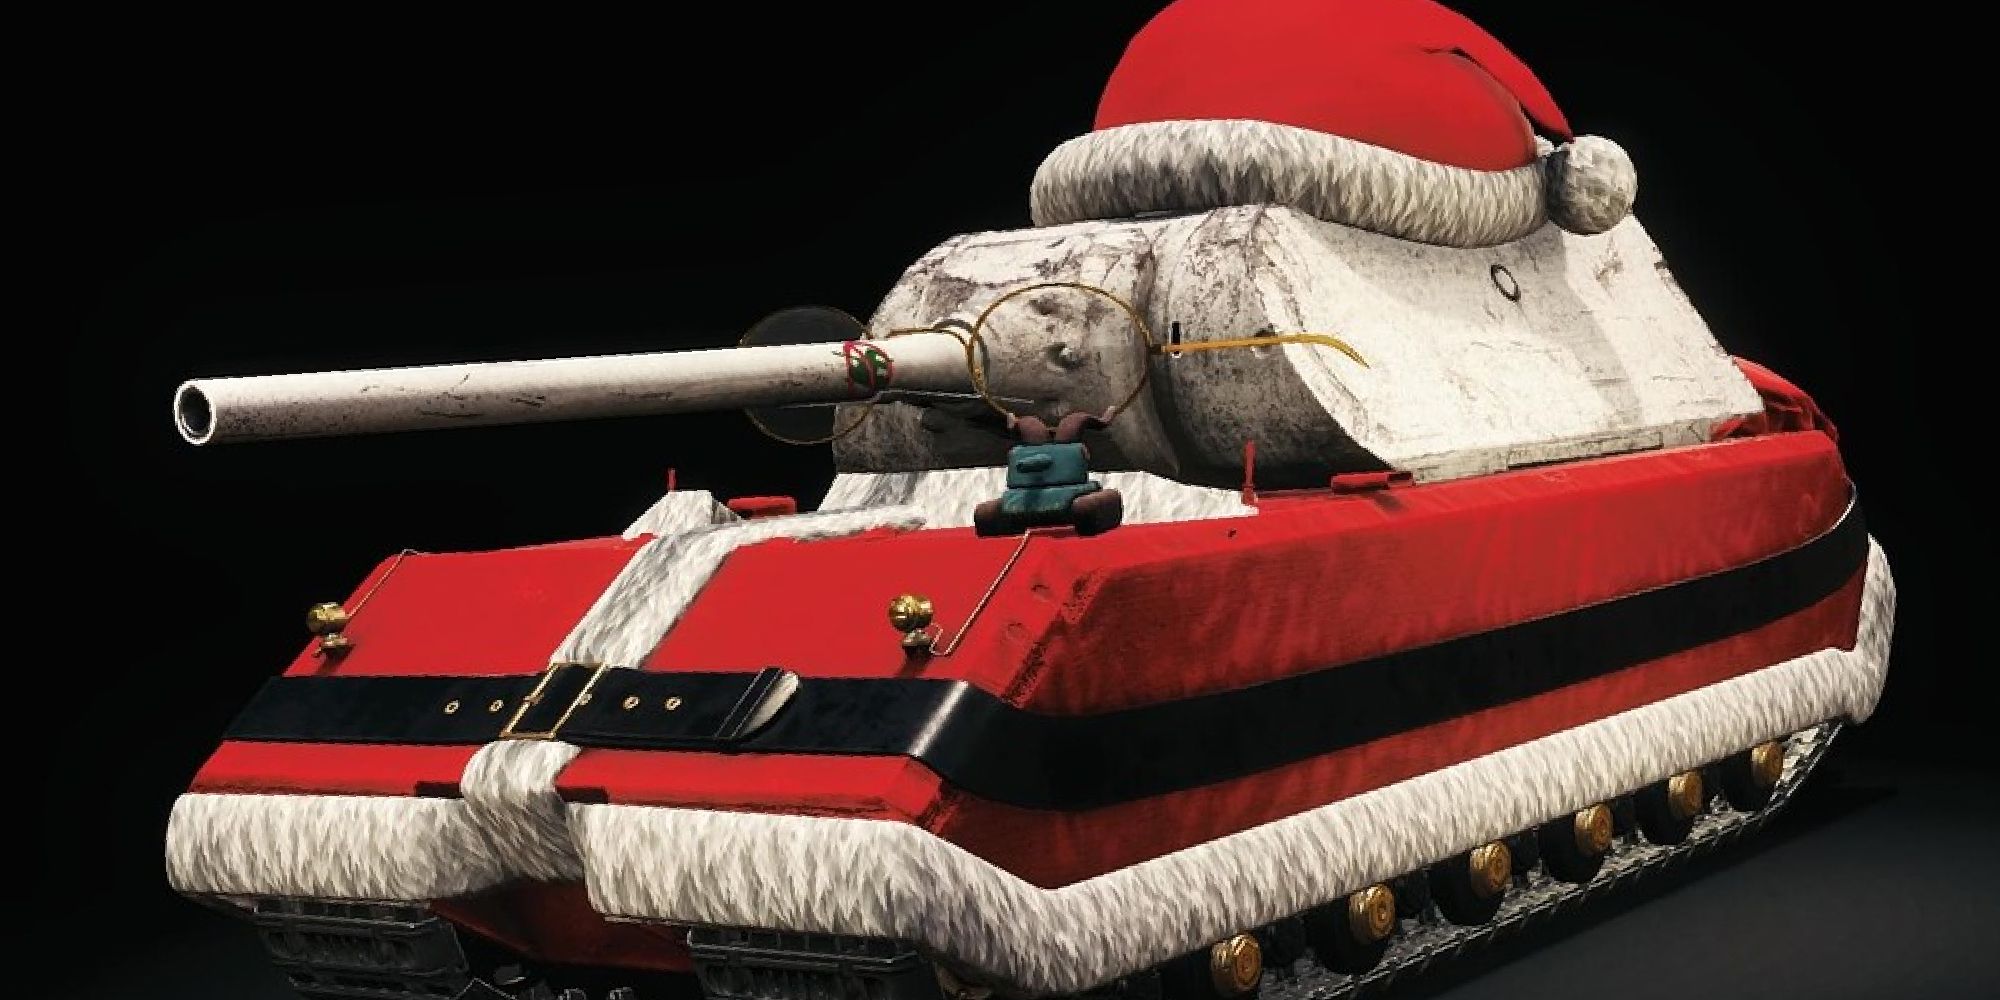 Tank in a Santa costume with giant glasses and red hat over a black background